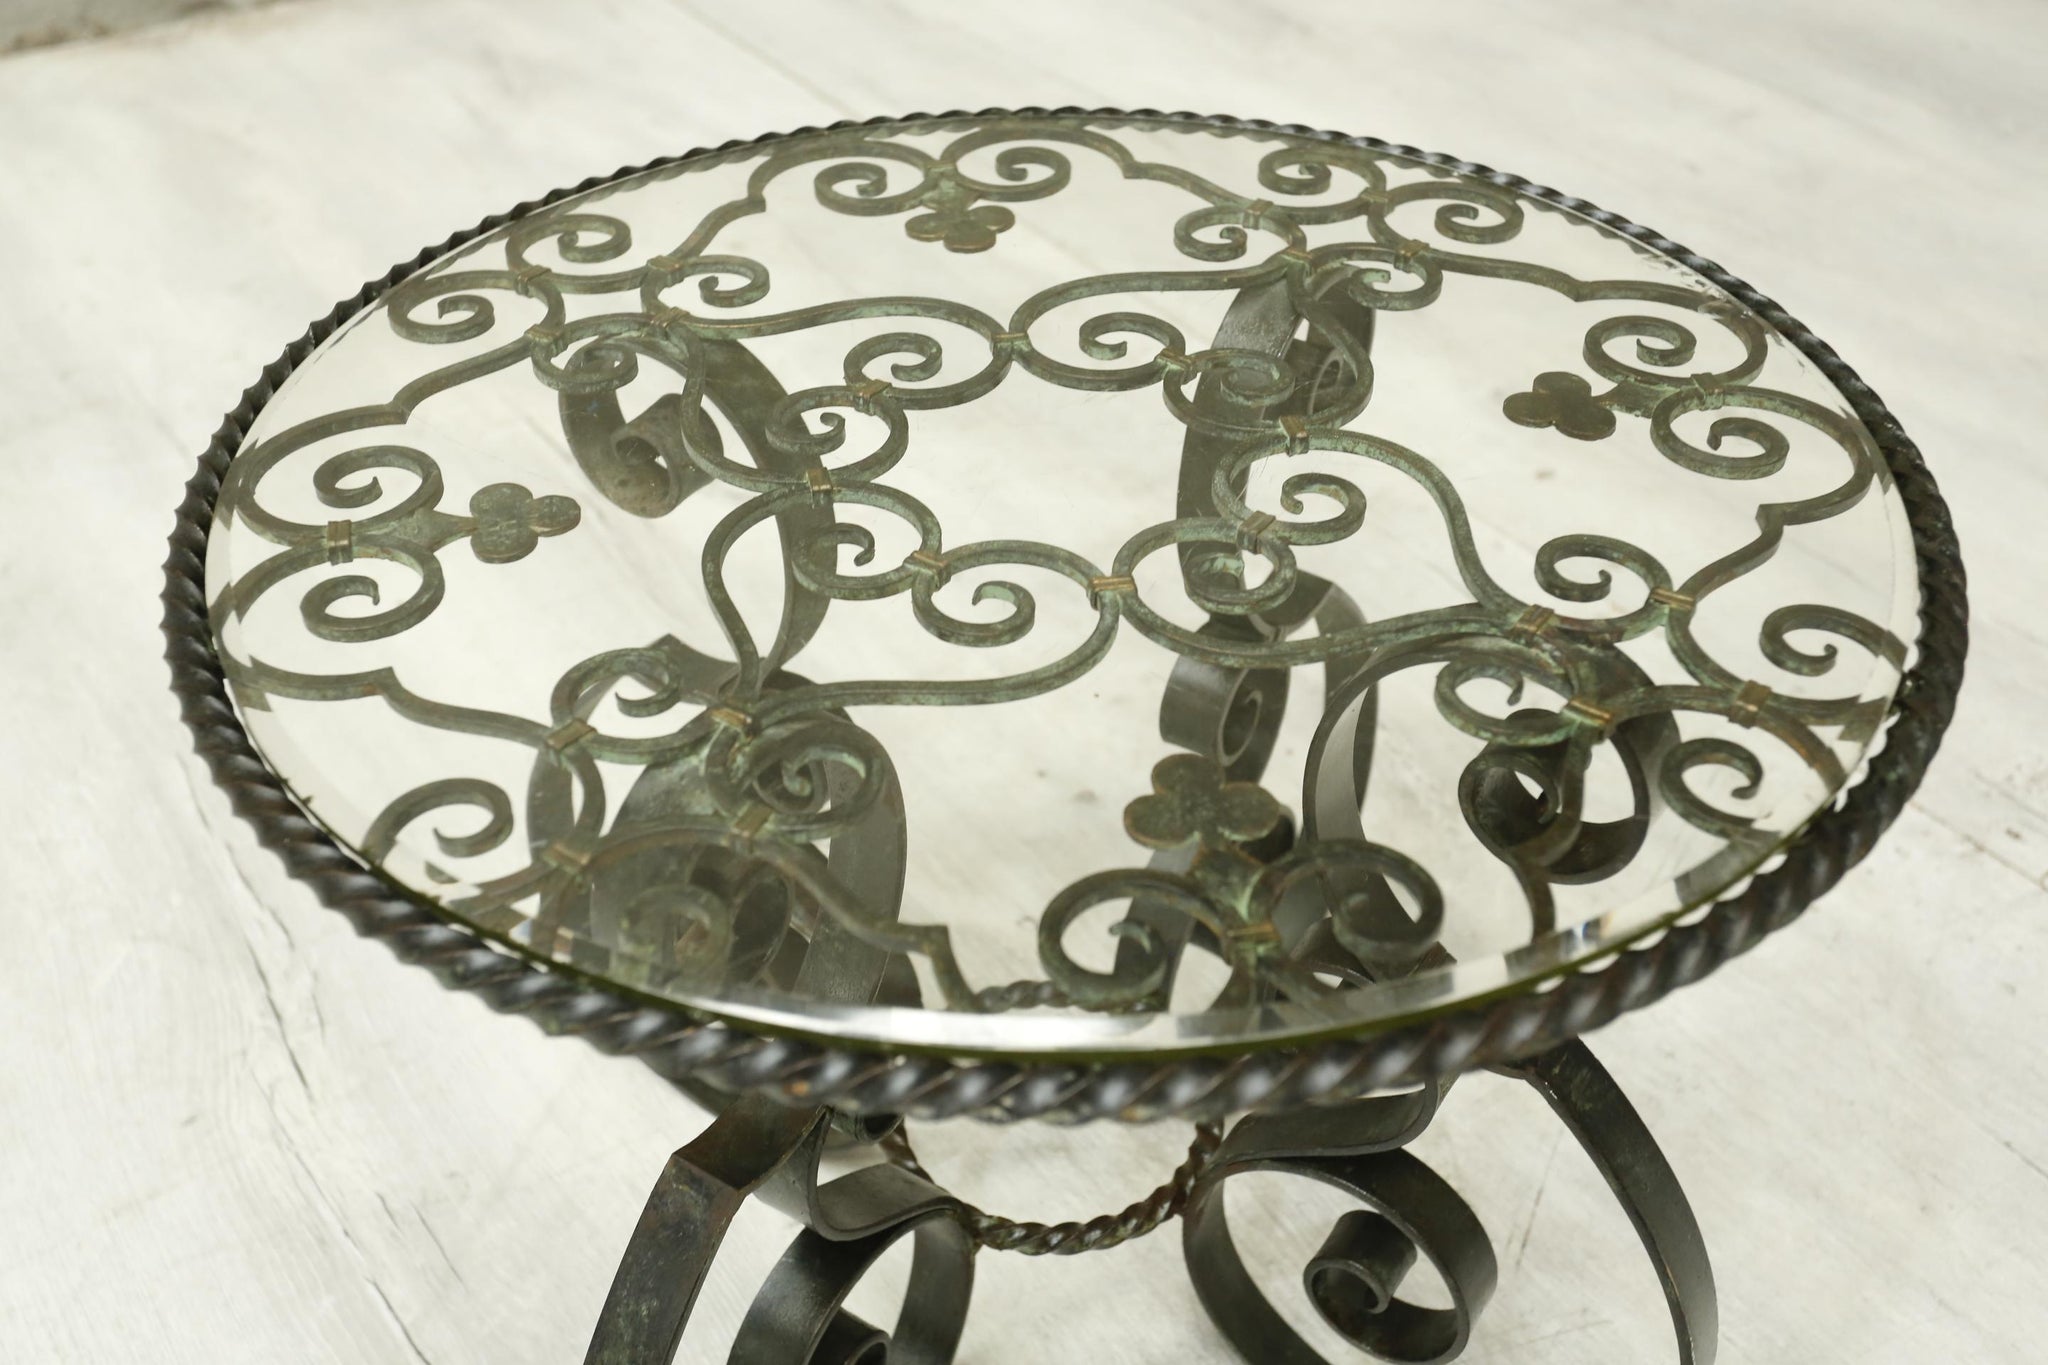 Mid century Spanish iron and glass side table